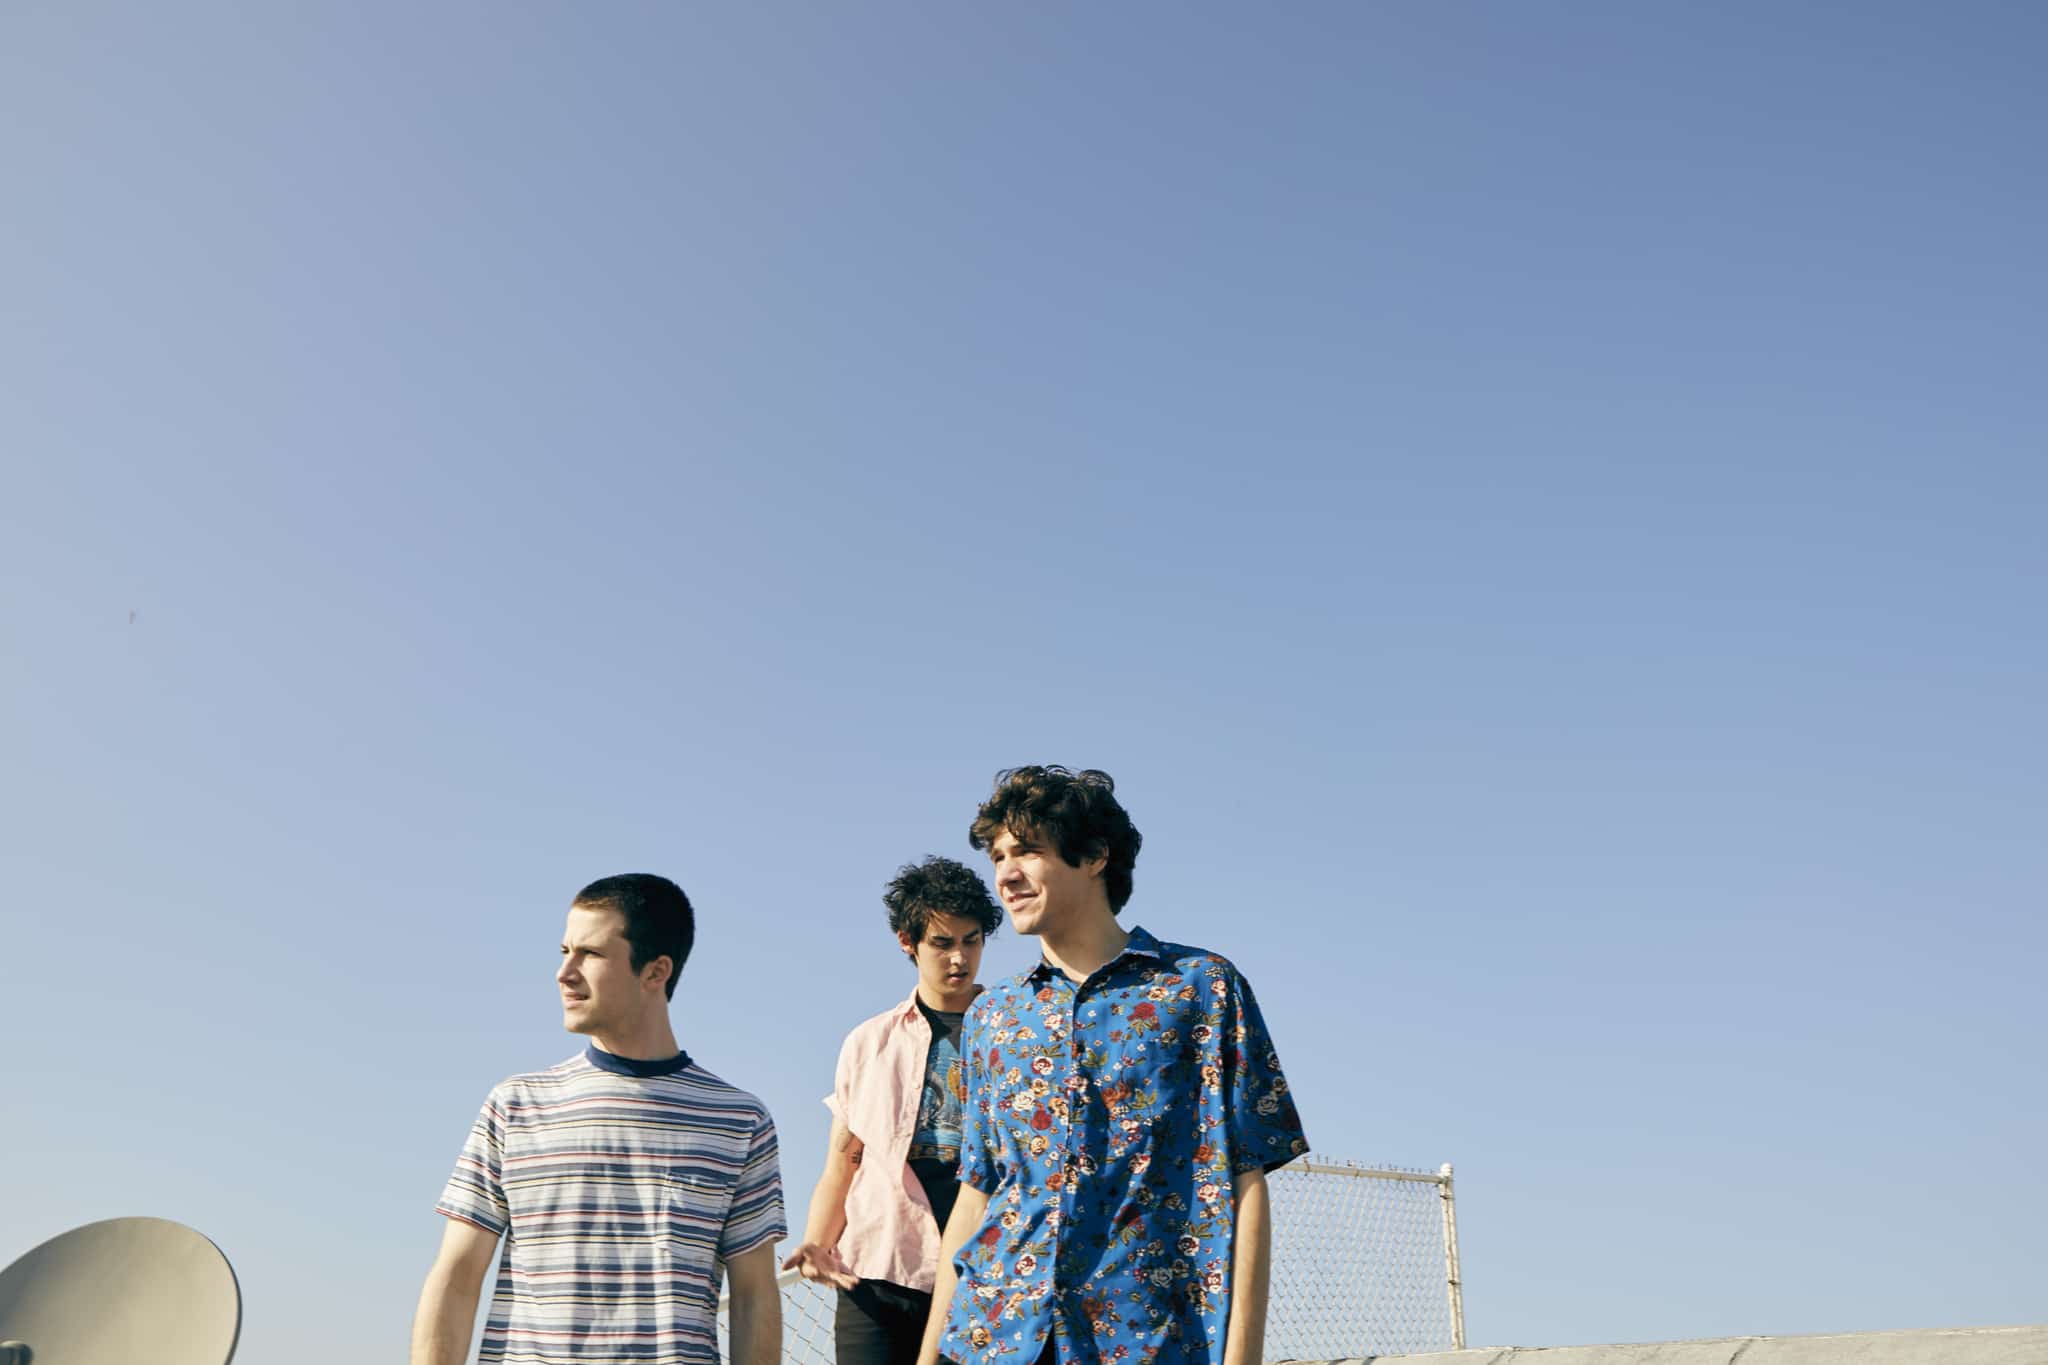 Wallows Approved Press Photo #8